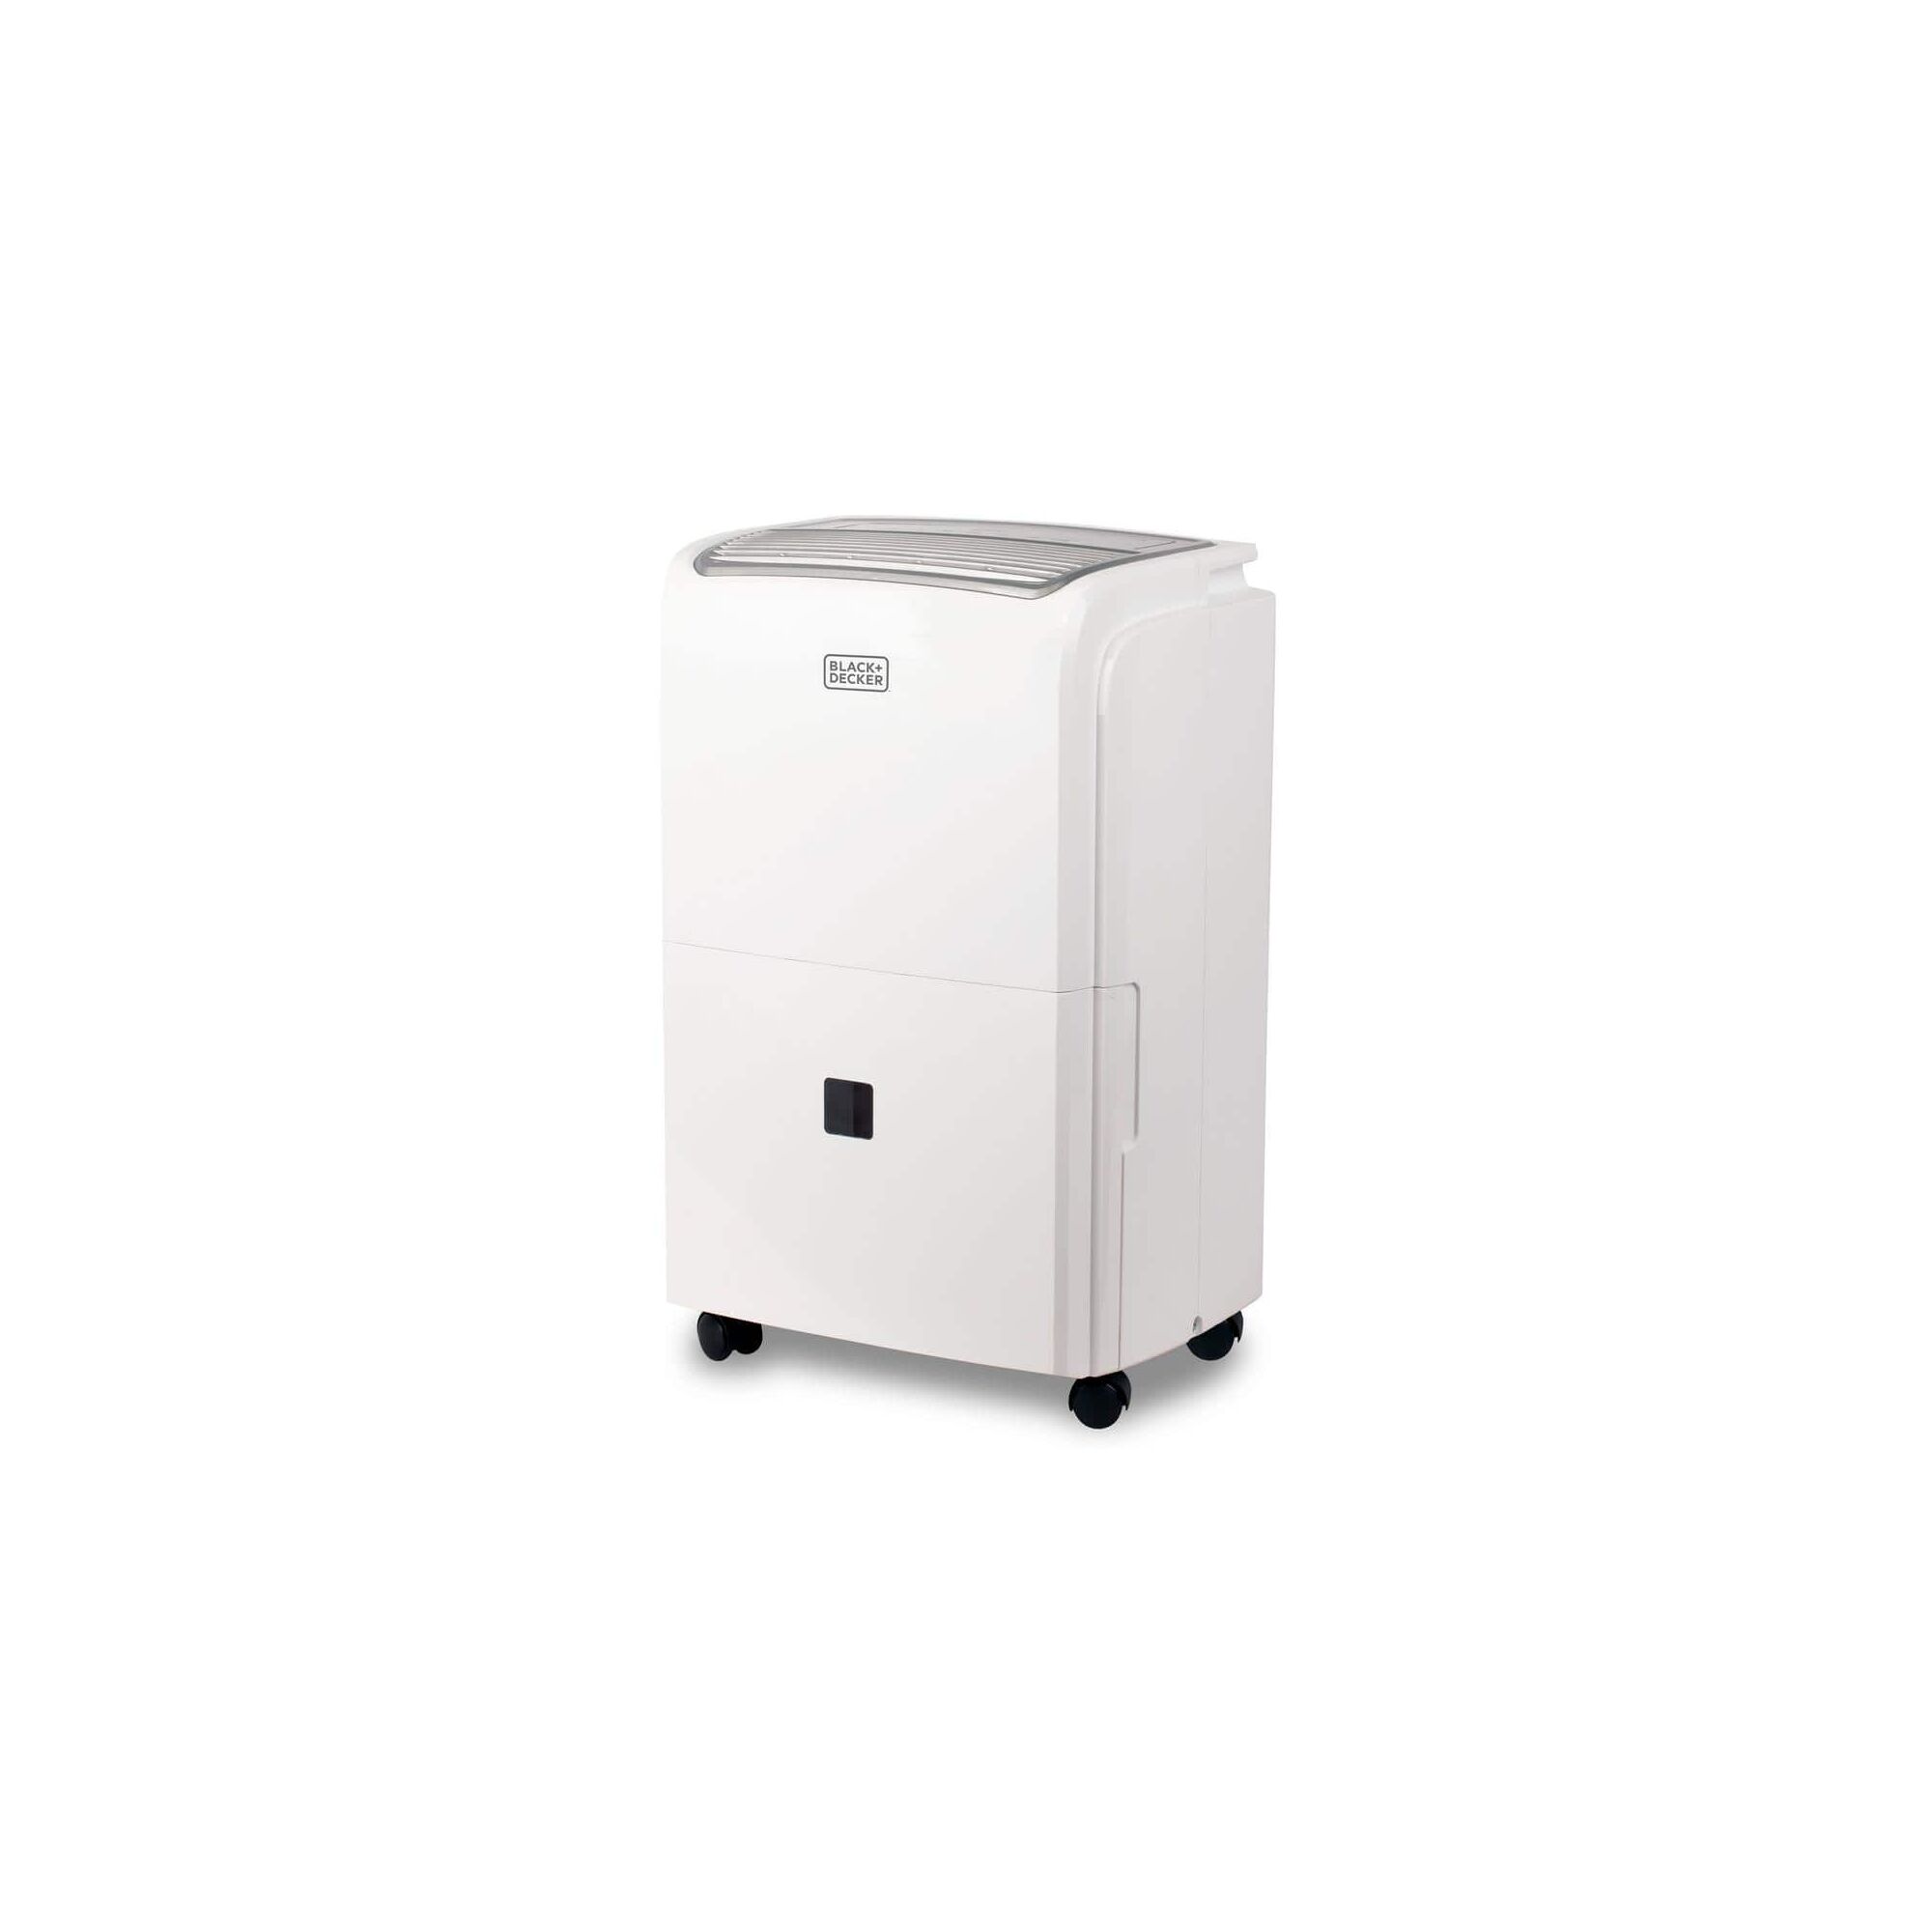 Profile photo of the front of the BLACK+DECKER dehumidifier